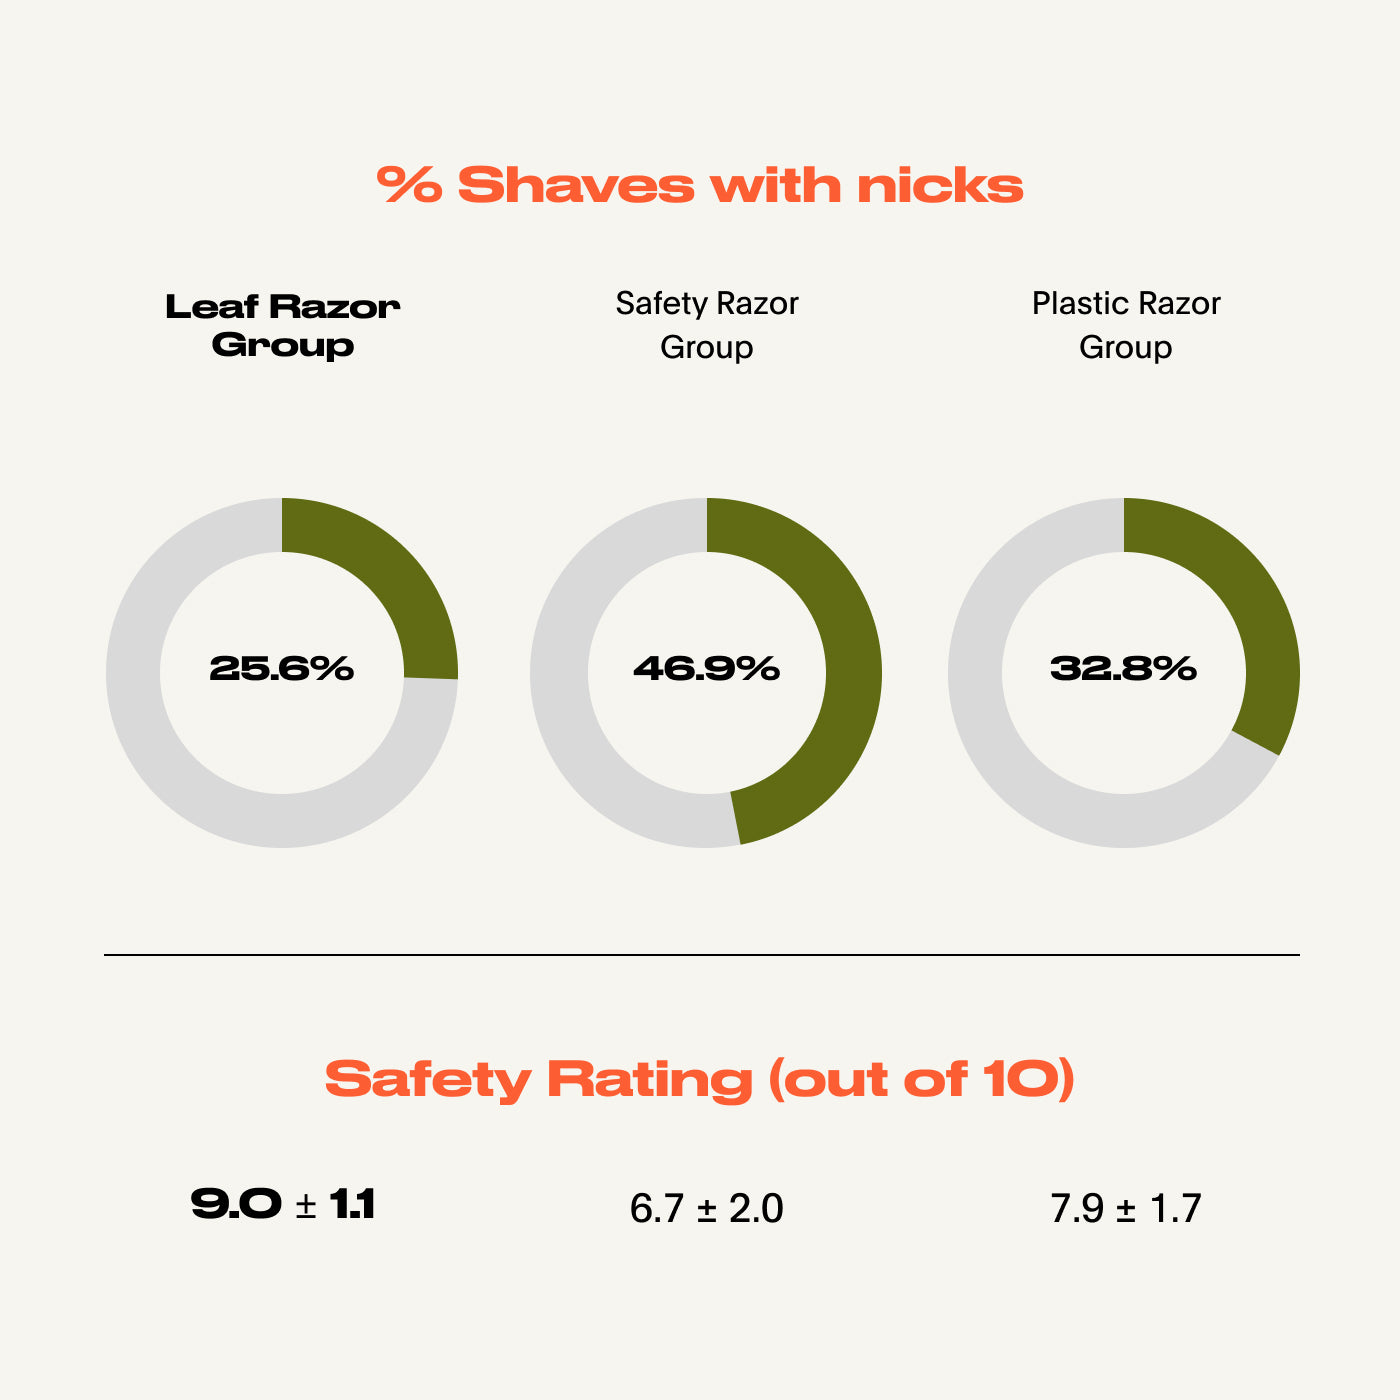 Graphic showing the safety ratings from the razor study, reported as the % of shaves where a nick or cut was reported: Leaf Razor Group 25.6%, Safety Razor Group 46.9%, Plastic Razor Group 32.8%